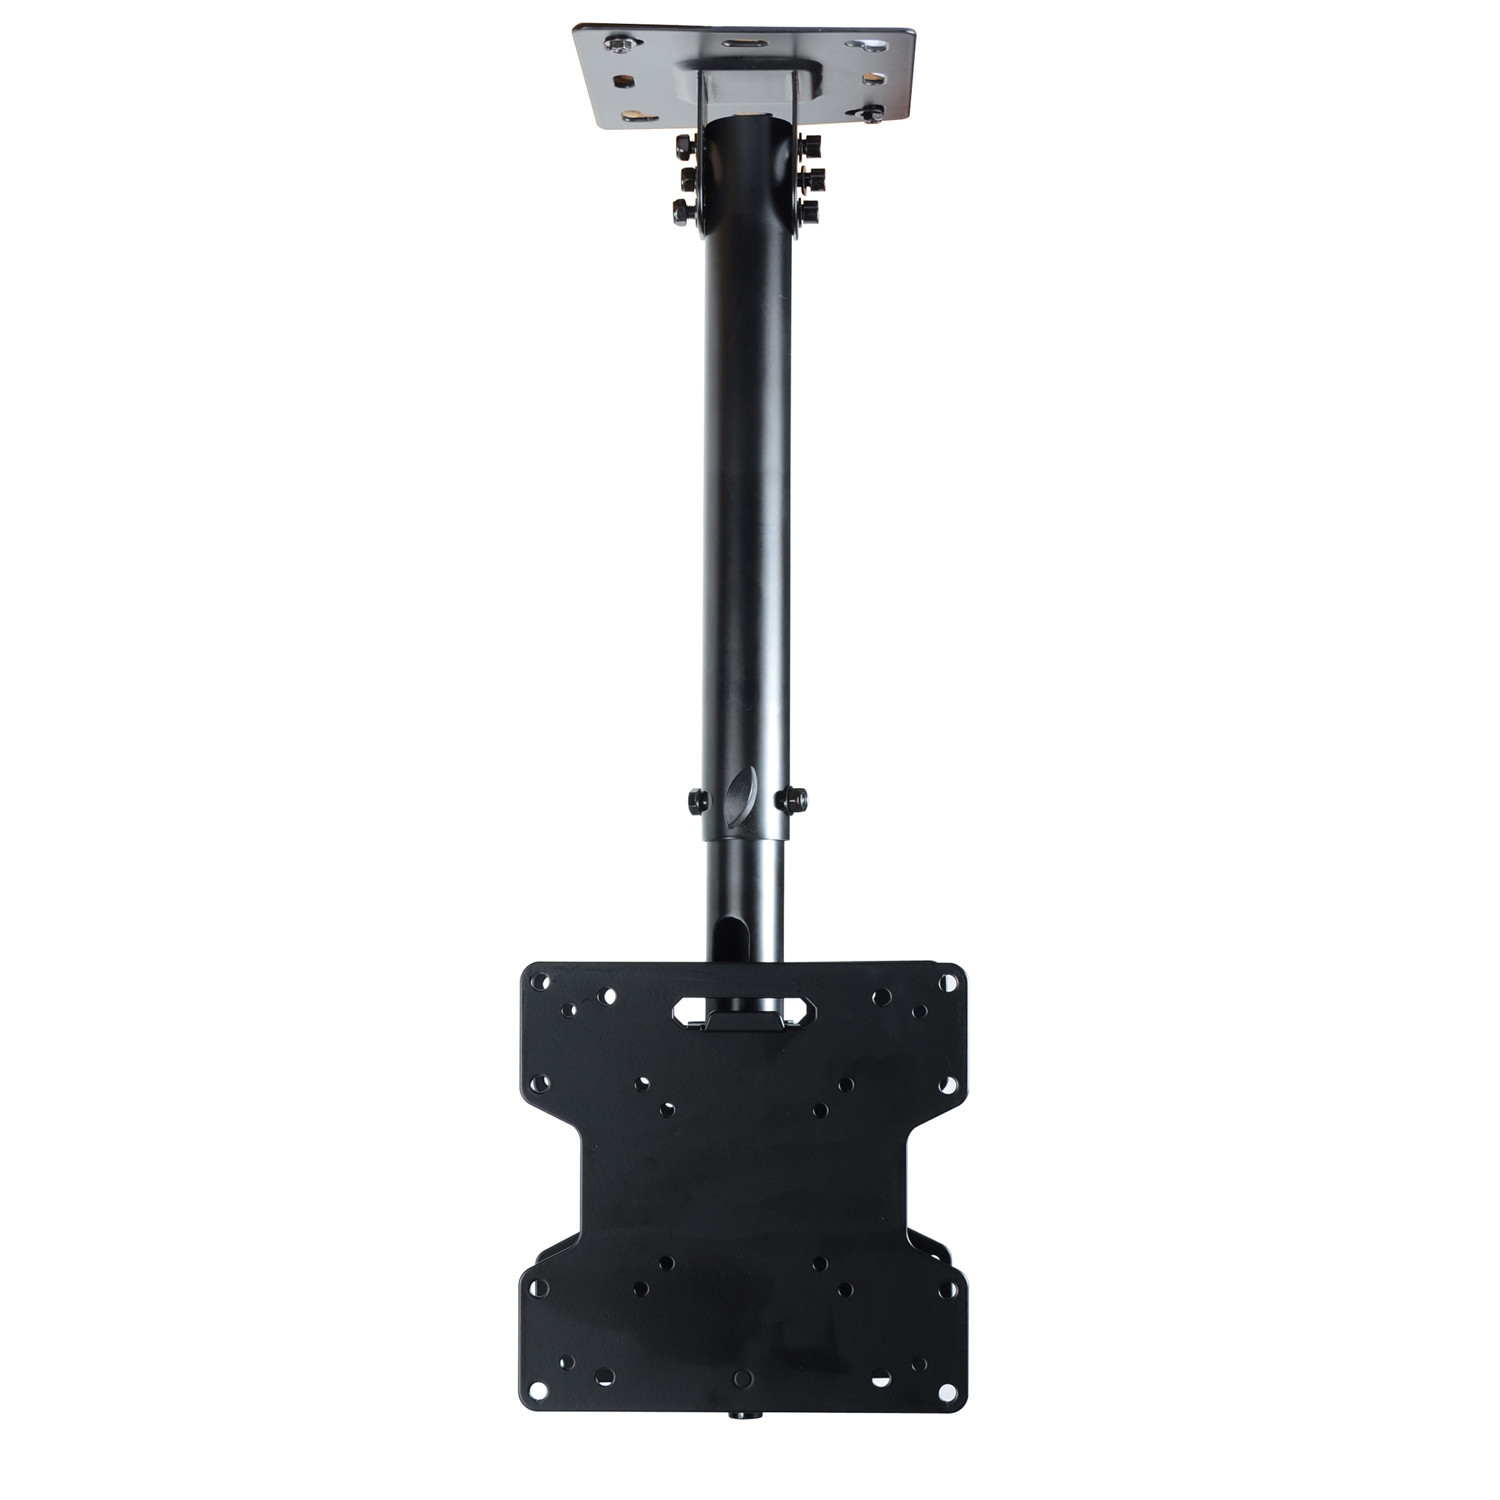 VideoSecu Adjustable Tilt Swivel Dual TV Ceiling Mount for 32"-70" LED LCD Plasma OLED HDTV Flat Panel Screen, 70" with mounting hole patterns 600x400/400x400/400x200/300x300/200x200/200x100mm BXB - image 3 of 6